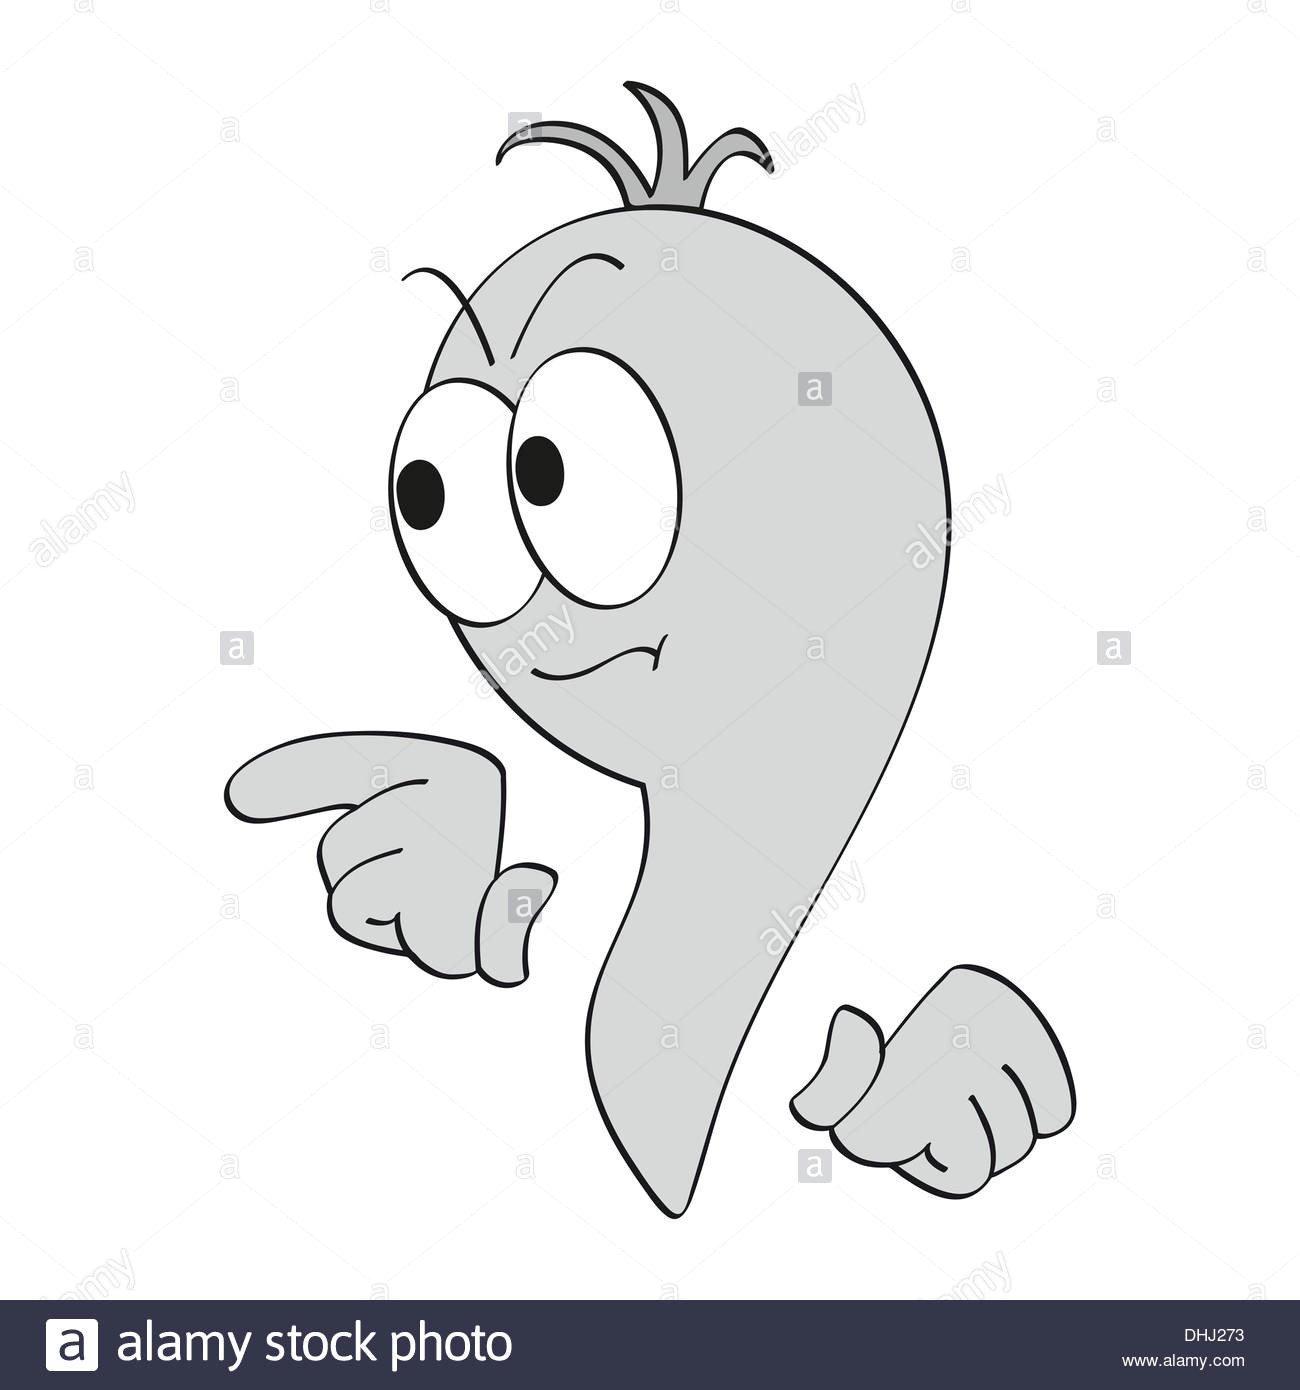 gray cartoon worm design vector illustration with different emotions stock image